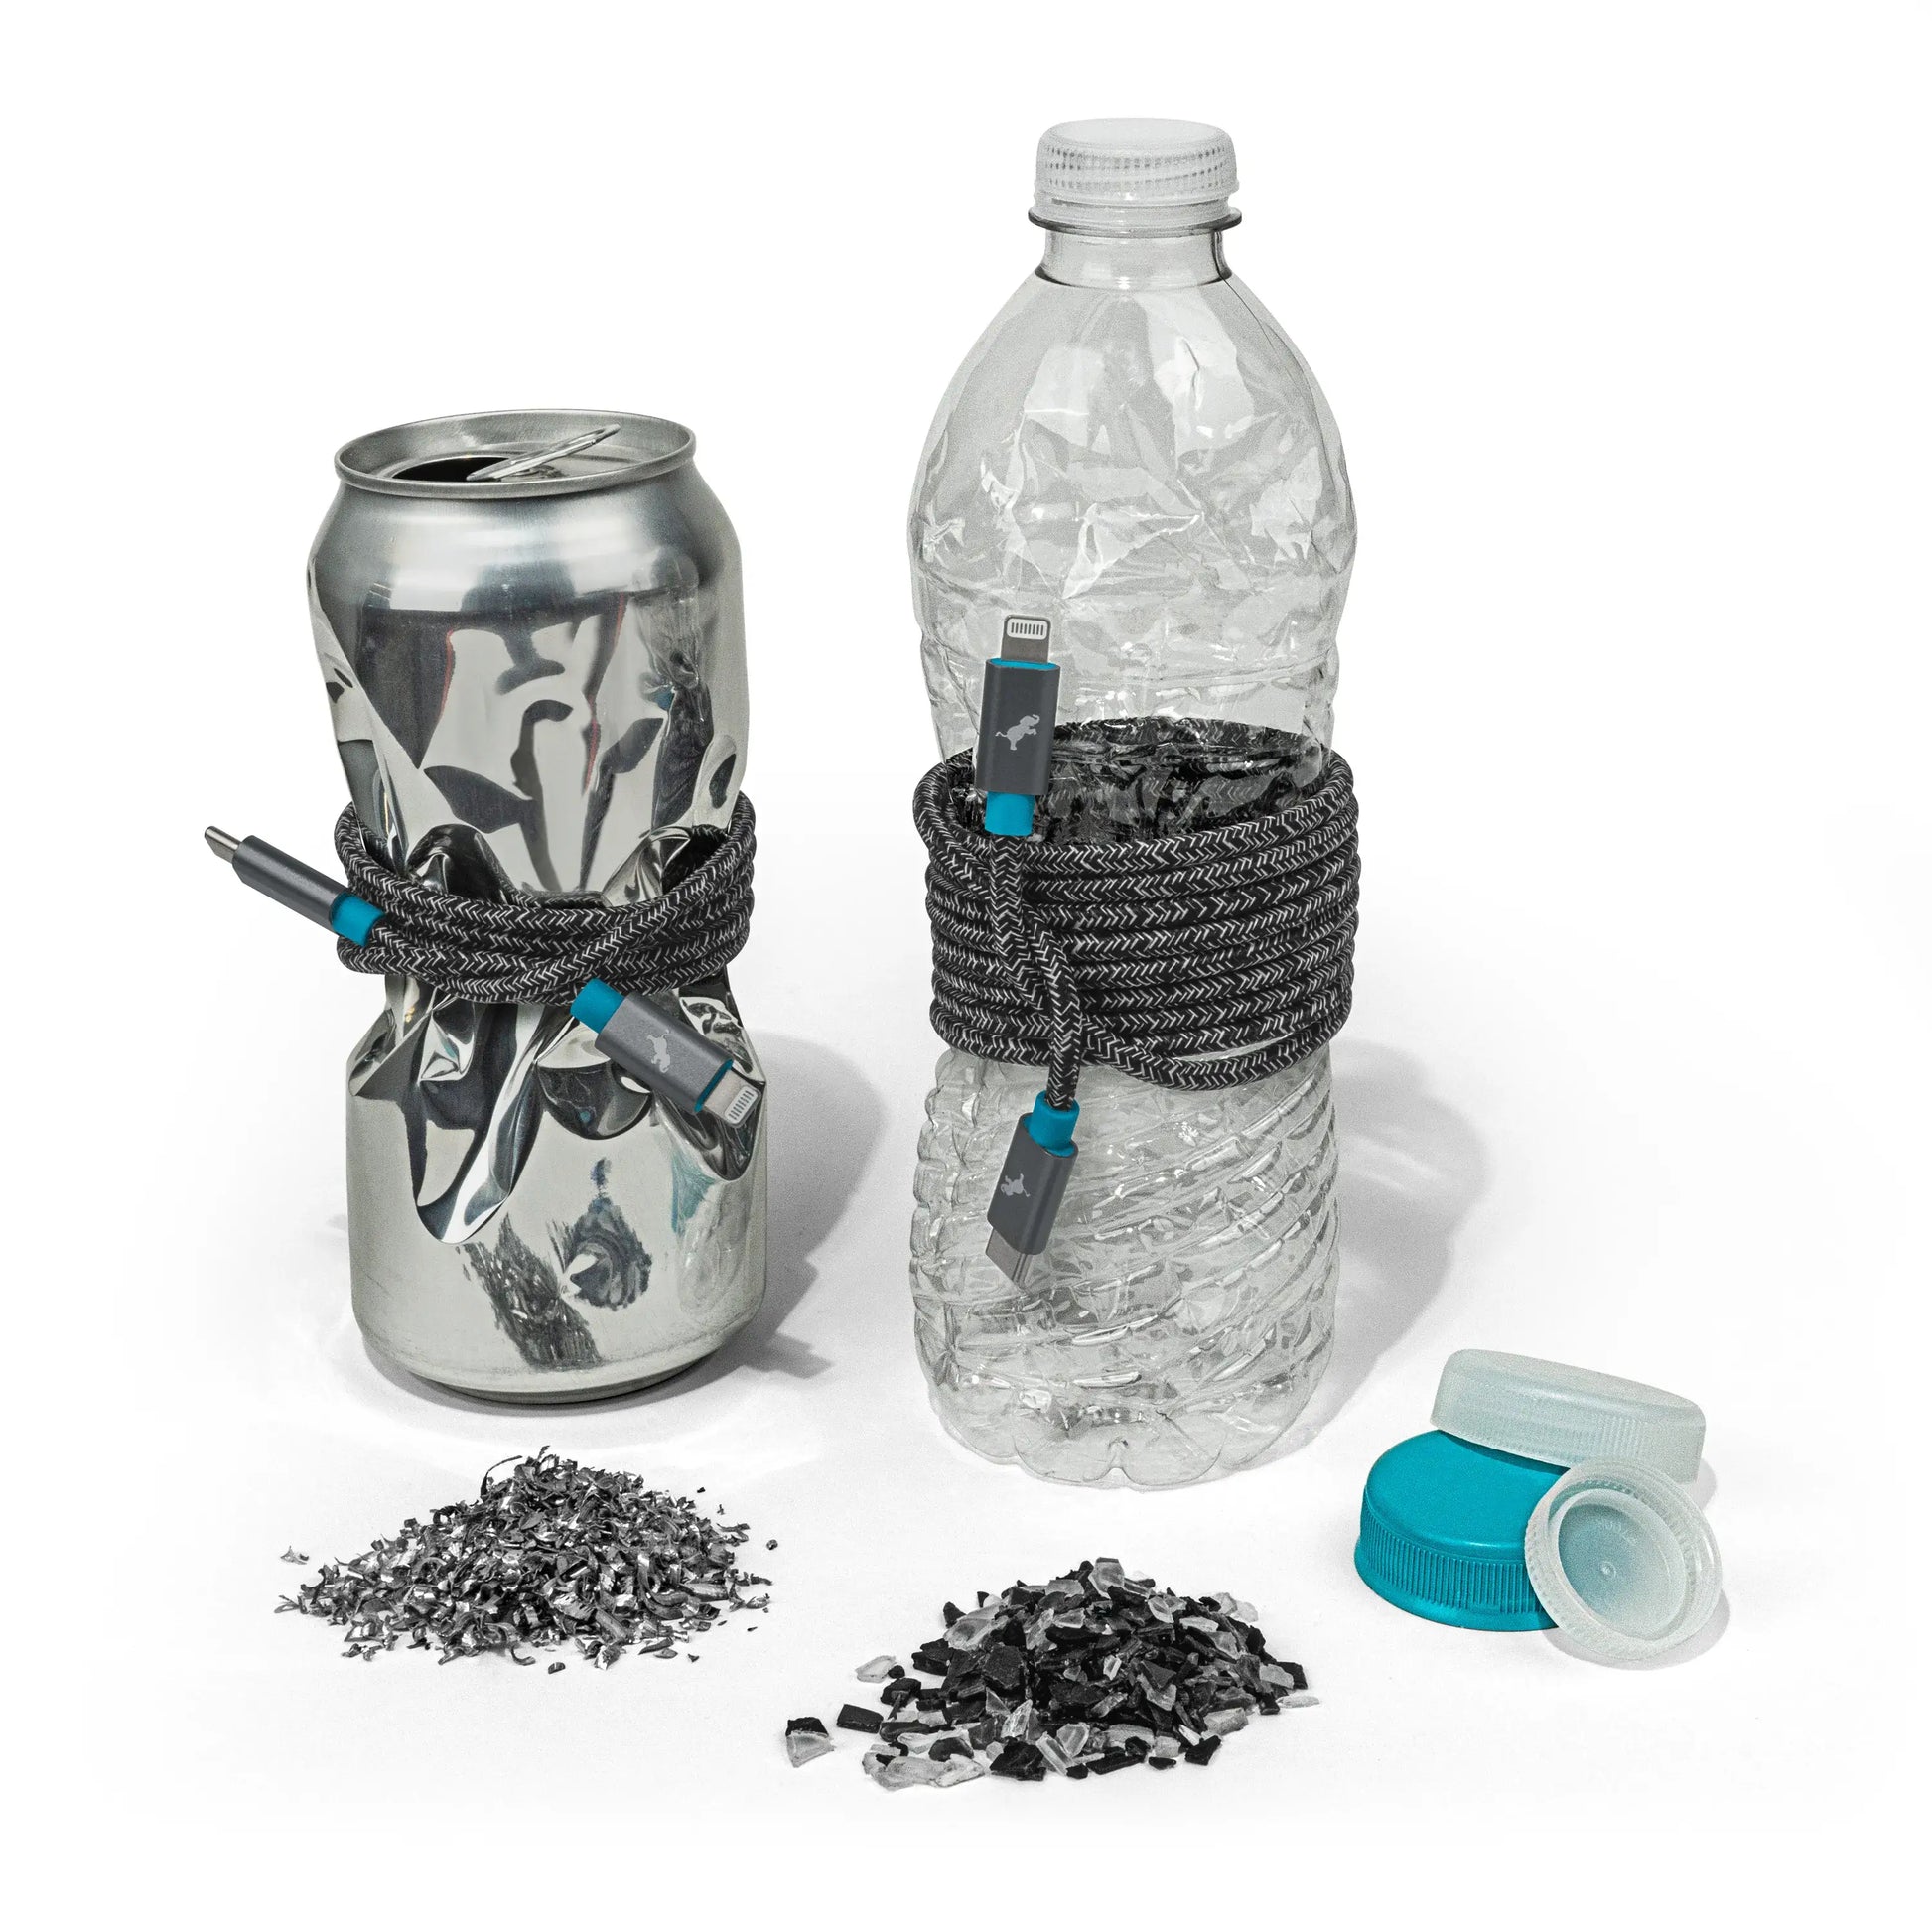 Cables wrapped around a can and a bottle.